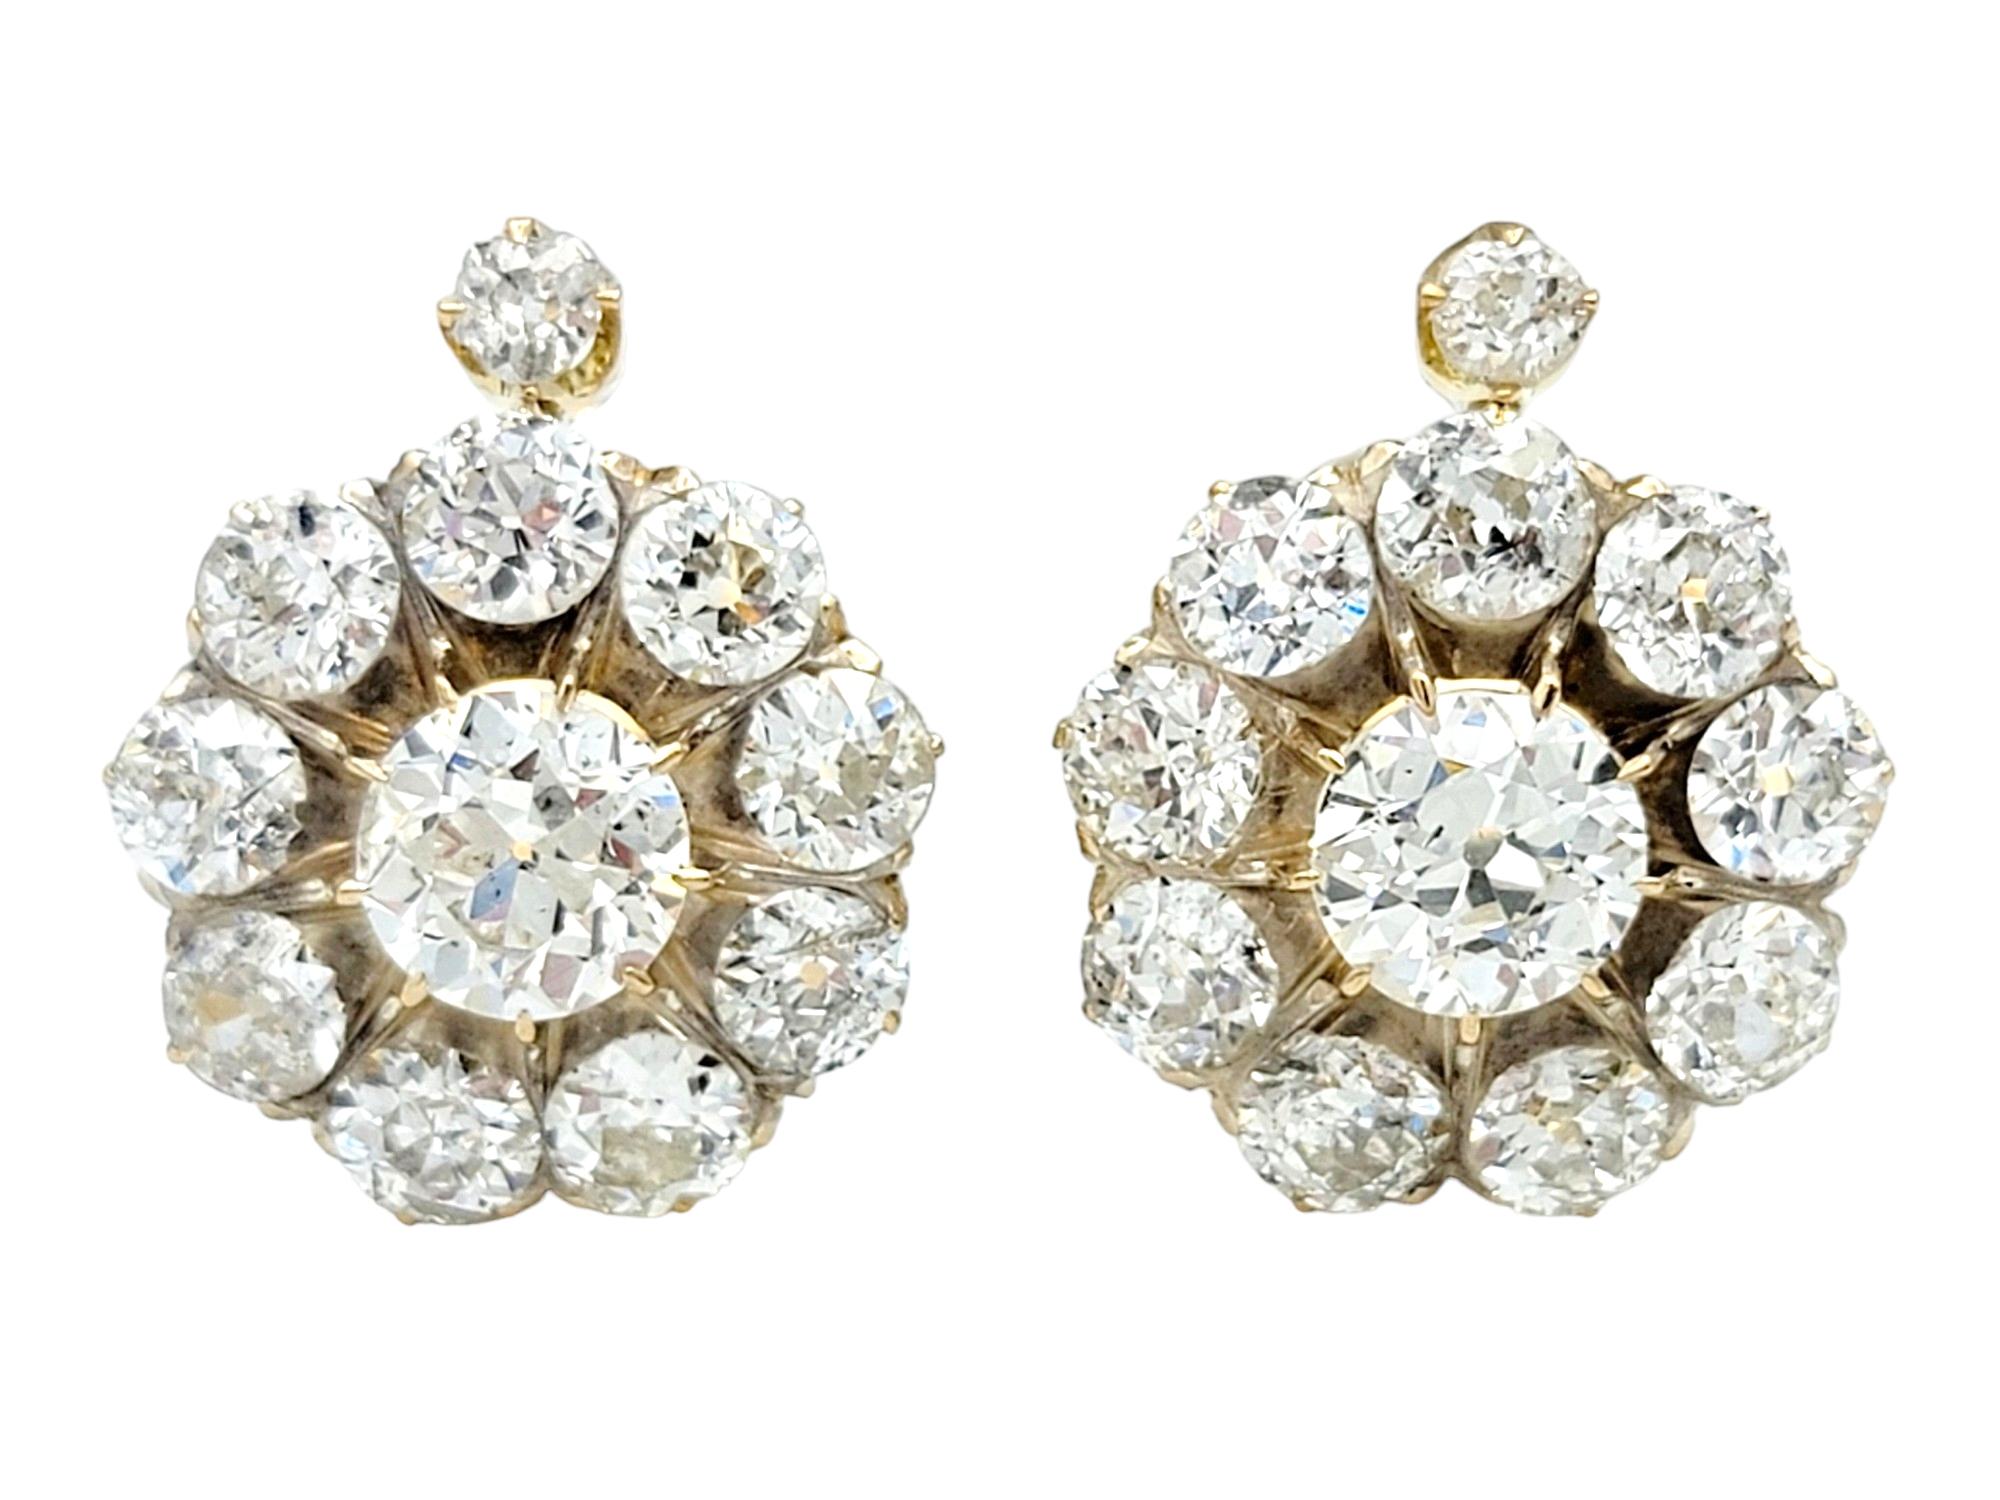 This stunning pair of antique diamond clip-on earrings, set in radiant 14 karat yellow gold, is a classic and elegant choice that exudes timeless beauty. The use of round old European cut diamonds adds a vintage charm to the earrings, and the